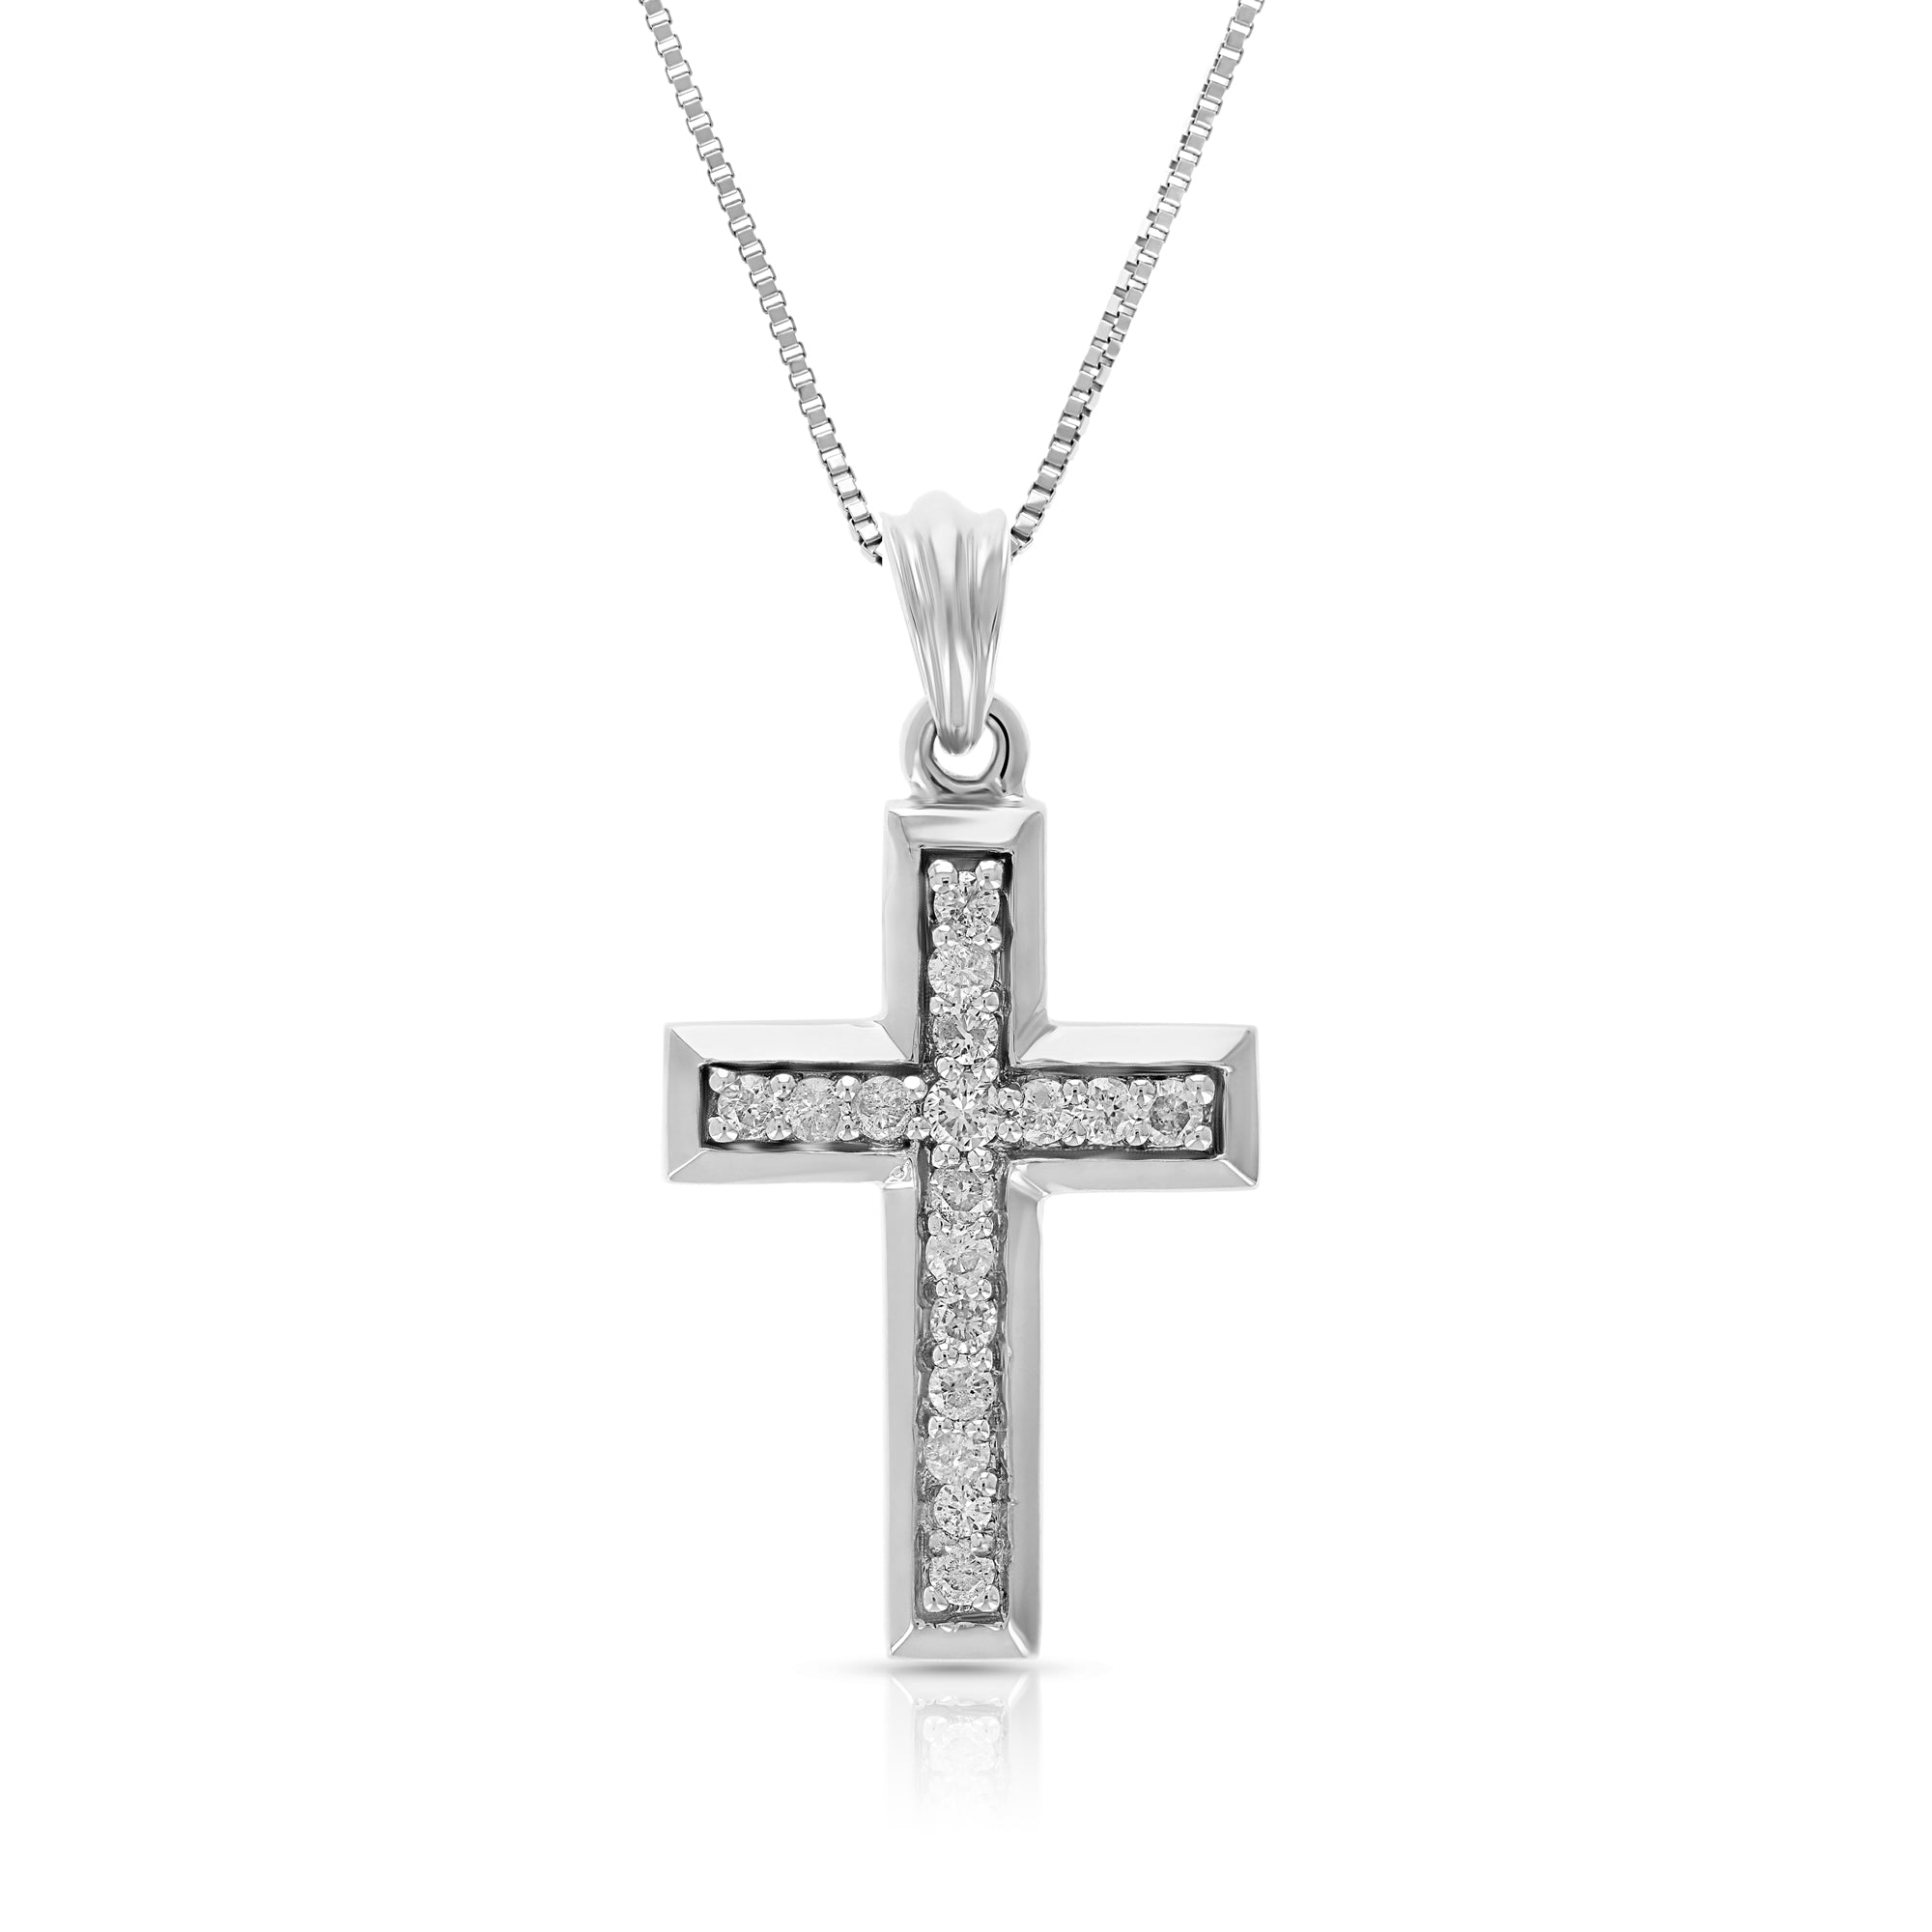 1/2 cttw Diamond Cross Pendant Necklace 14K White Gold with Chain